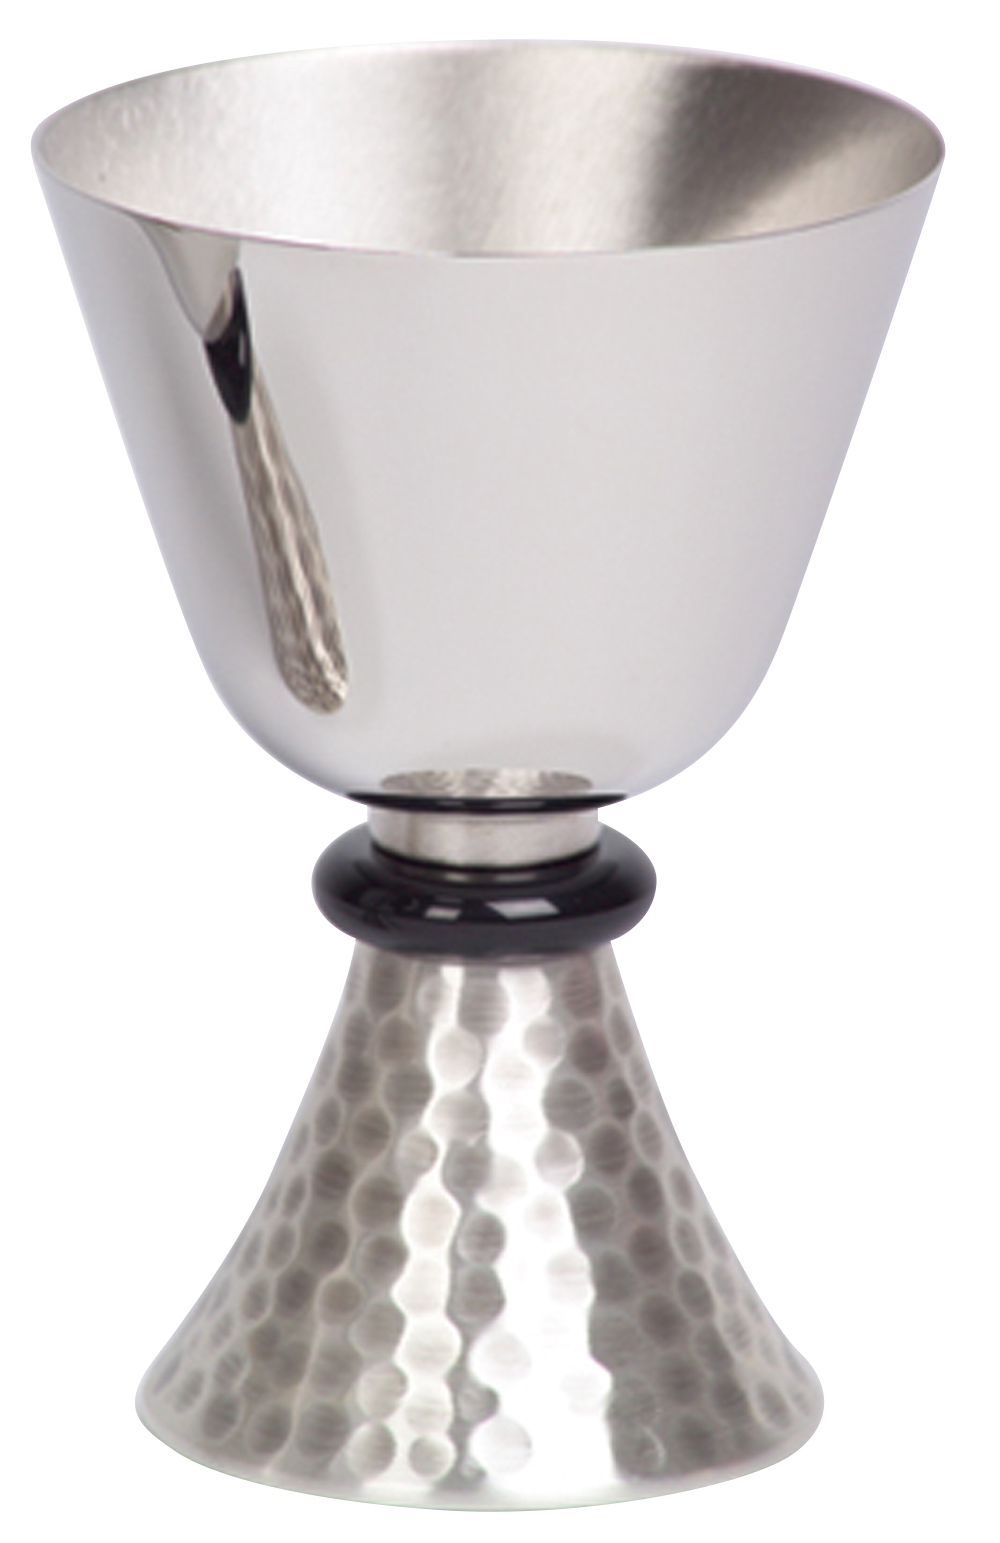 Chalice 8 oz Stainless Steel Cup Silver Base K594